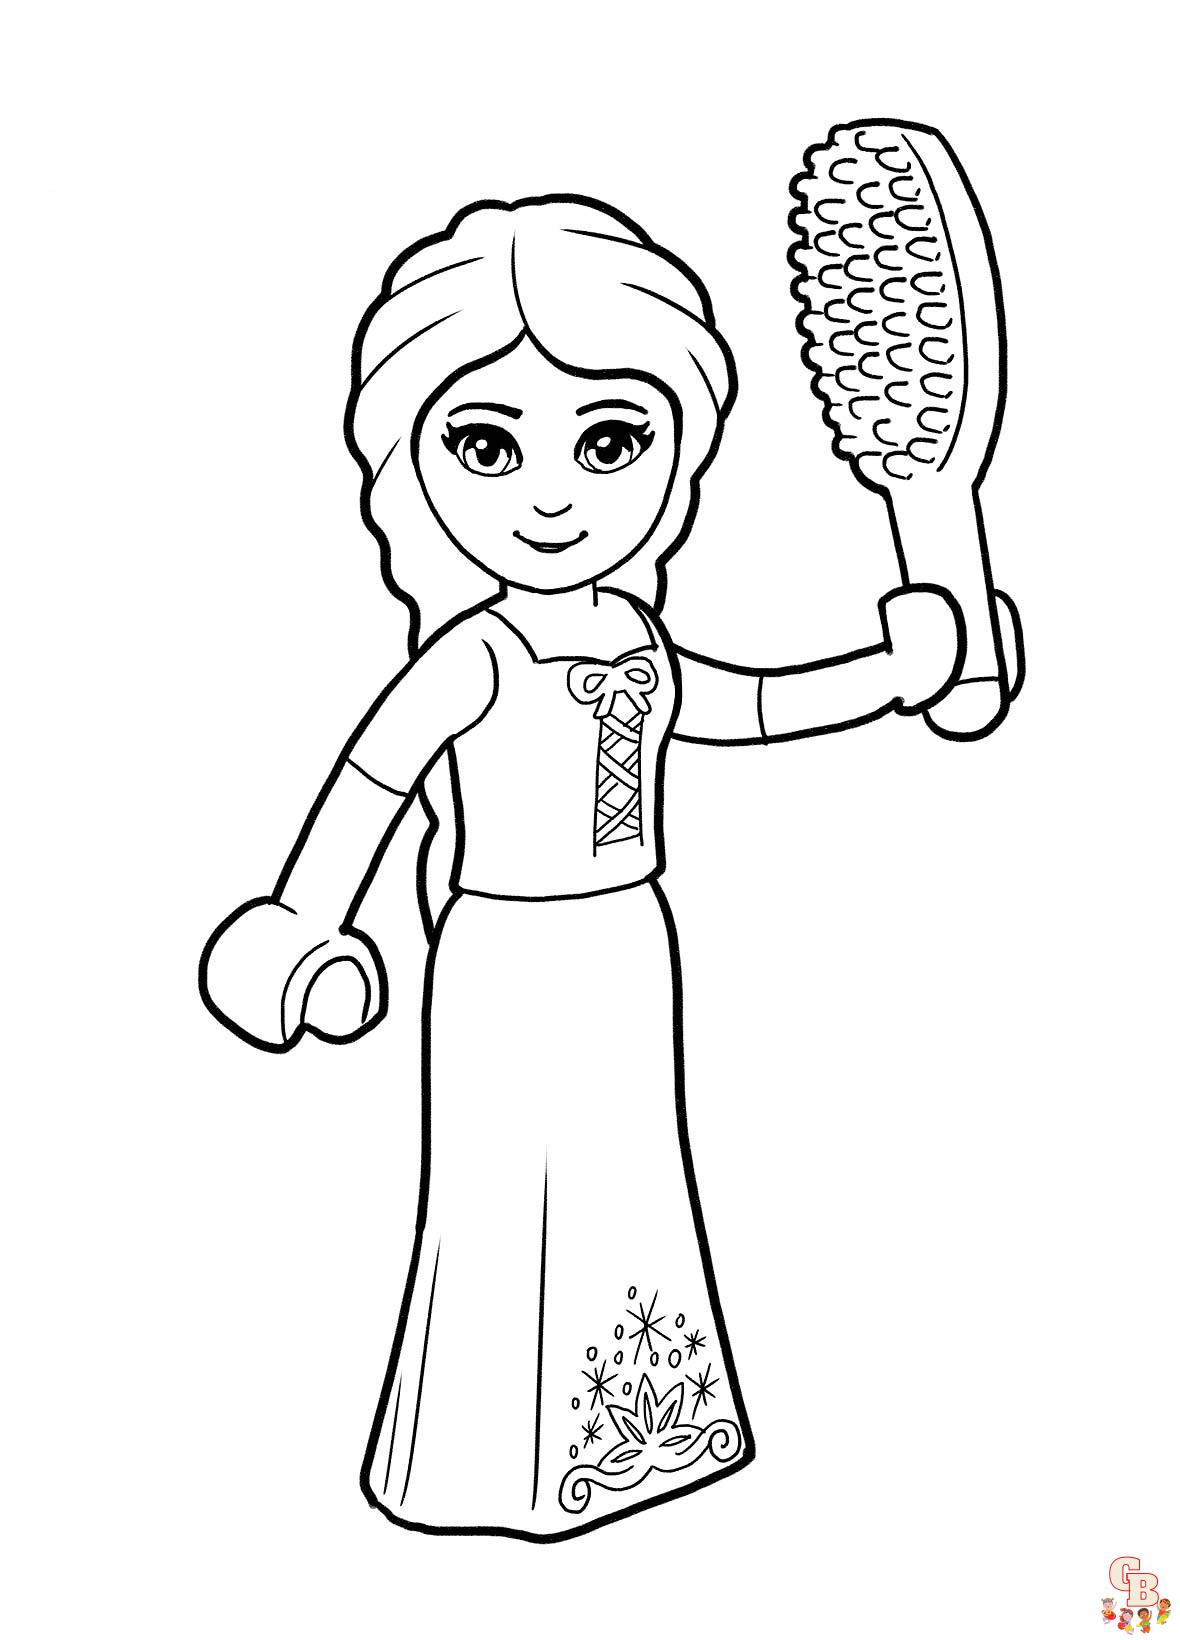 Lego Princess Coloring Pages 1